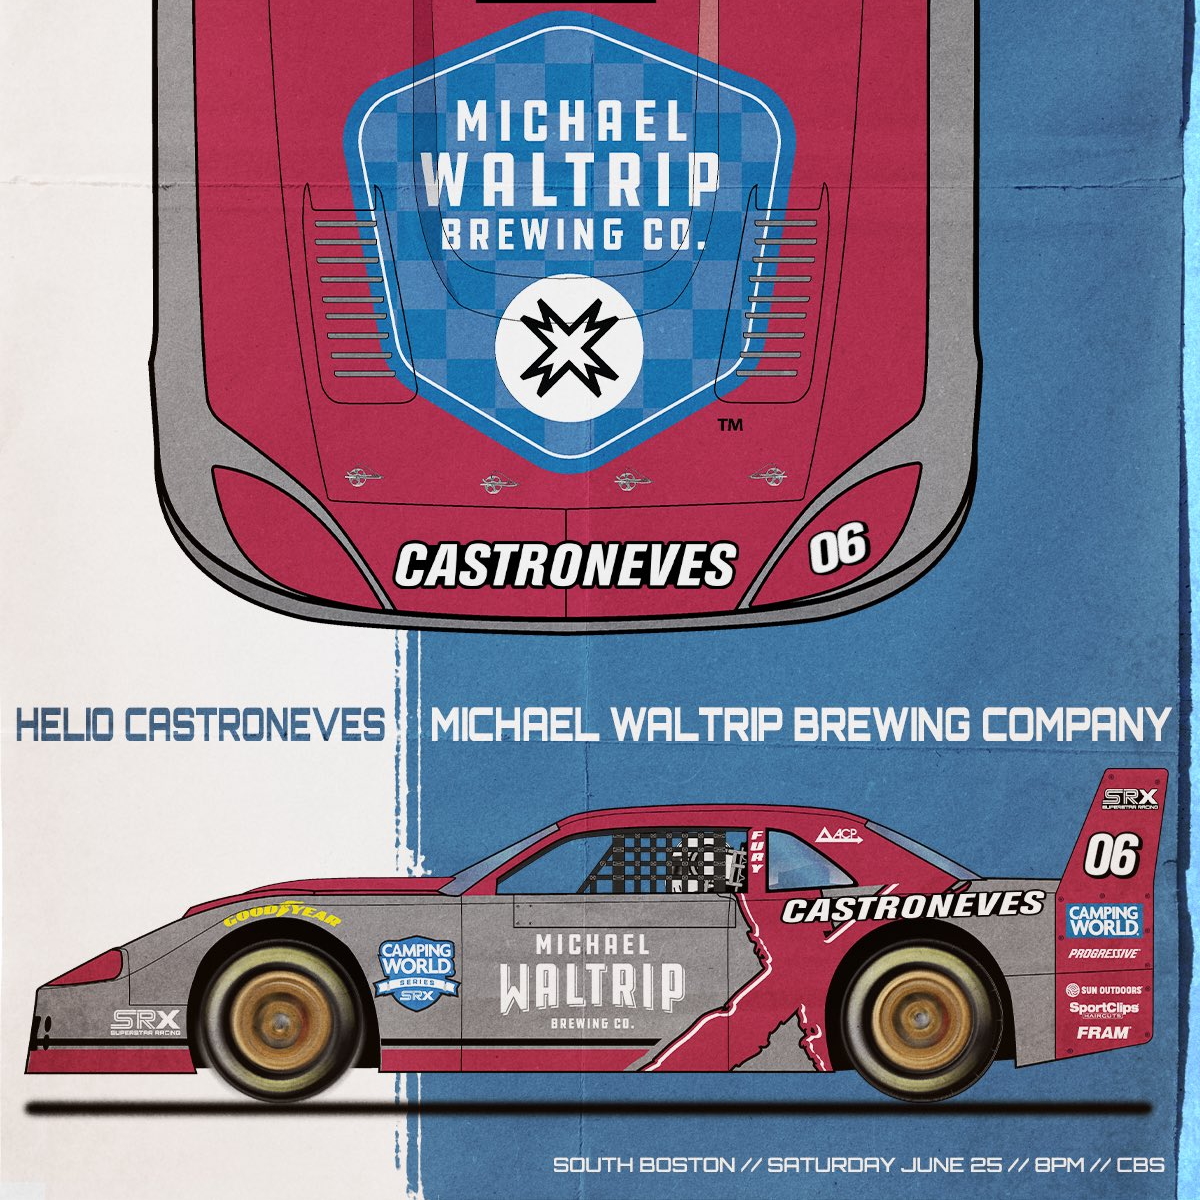 Michael Waltrip Brewing Co. Helio Castroneves SRX Racing South Boston